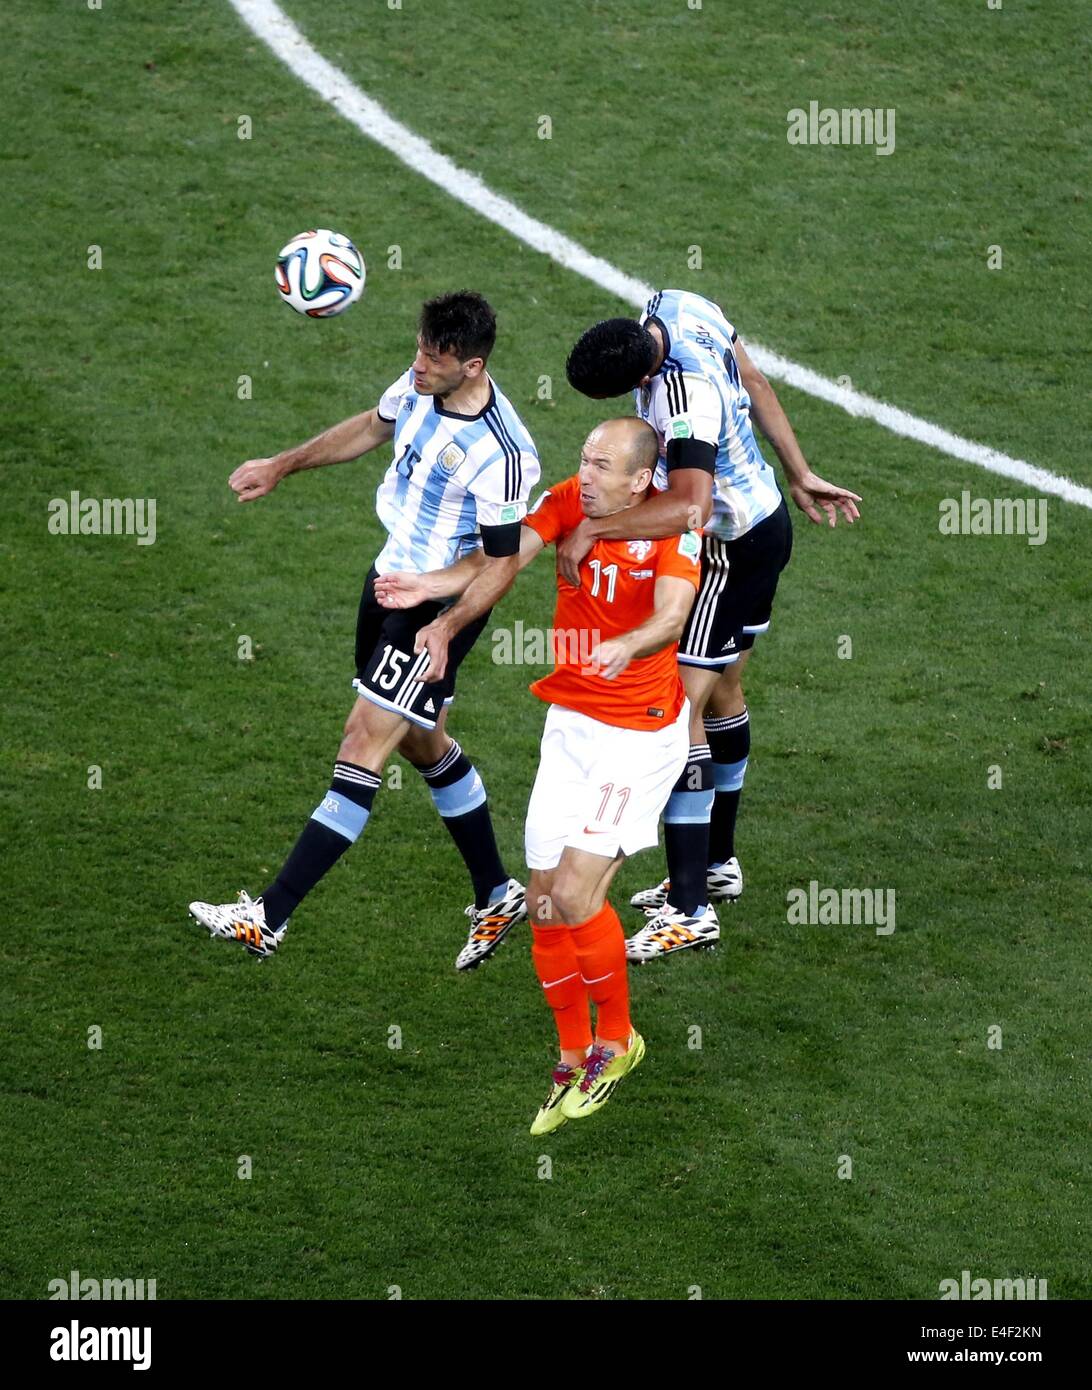 Sao Paulo, Brazil. 9th July, 2014. Netherlands' Arjen Robben (C) competes for a header with Argentina's Martin Demichelis (L) and Ezequiel Garay during a semifinal match between Netherlands and Argentina of 2014 FIFA World Cup at the Arena de Sao Paulo Stadium in Sao Paulo, Brazil, on July 9, 2014. Credit:  Liao Yujie/Xinhua/Alamy Live News Stock Photo